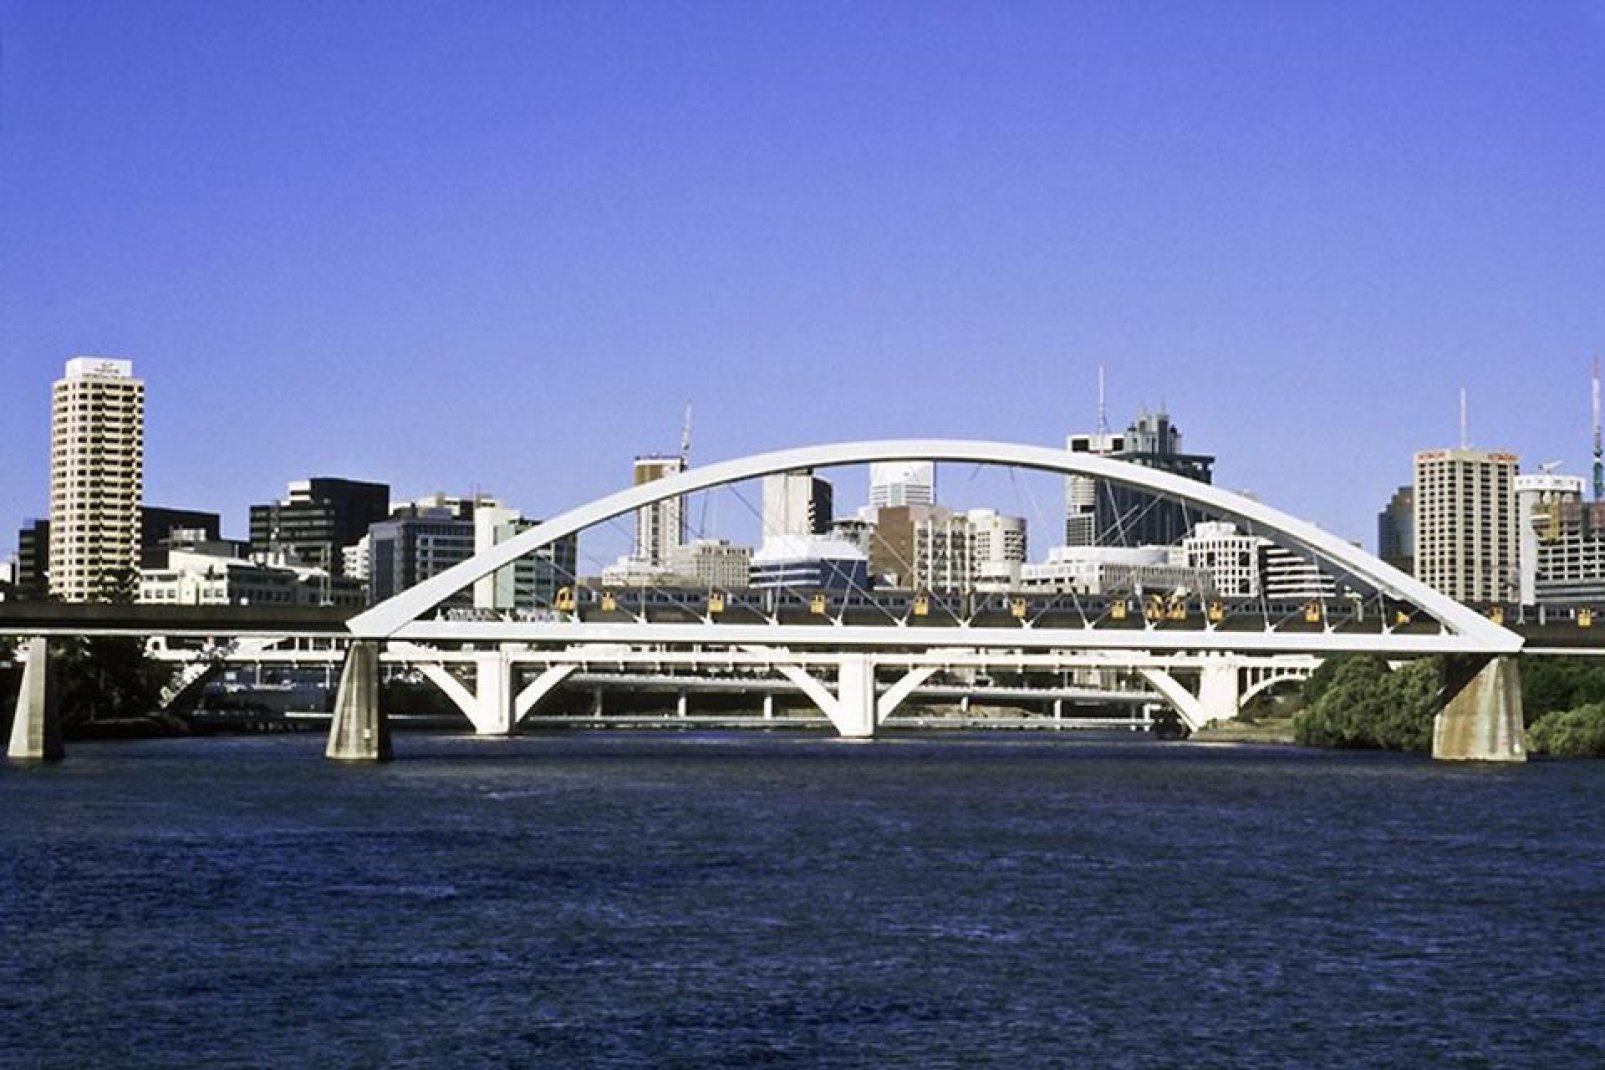 Brisbane is Australia's third largest city in terms of population.